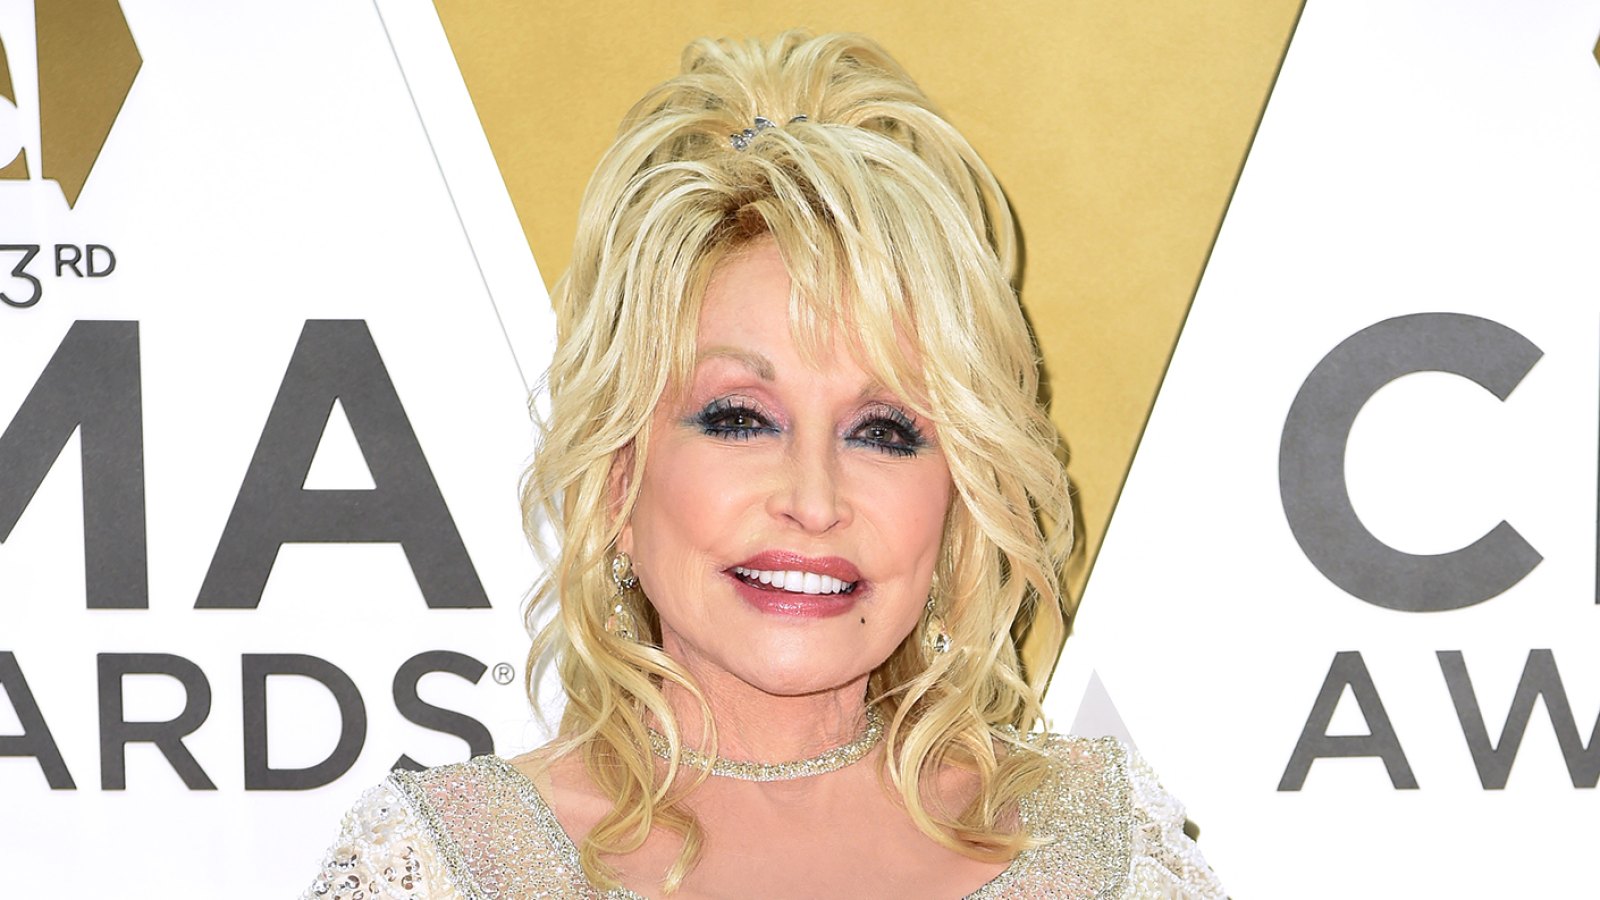 Dolly Parton Shares Rare Throwback Photo With Husband Carl Dean After More Than 55 Years of Marriage